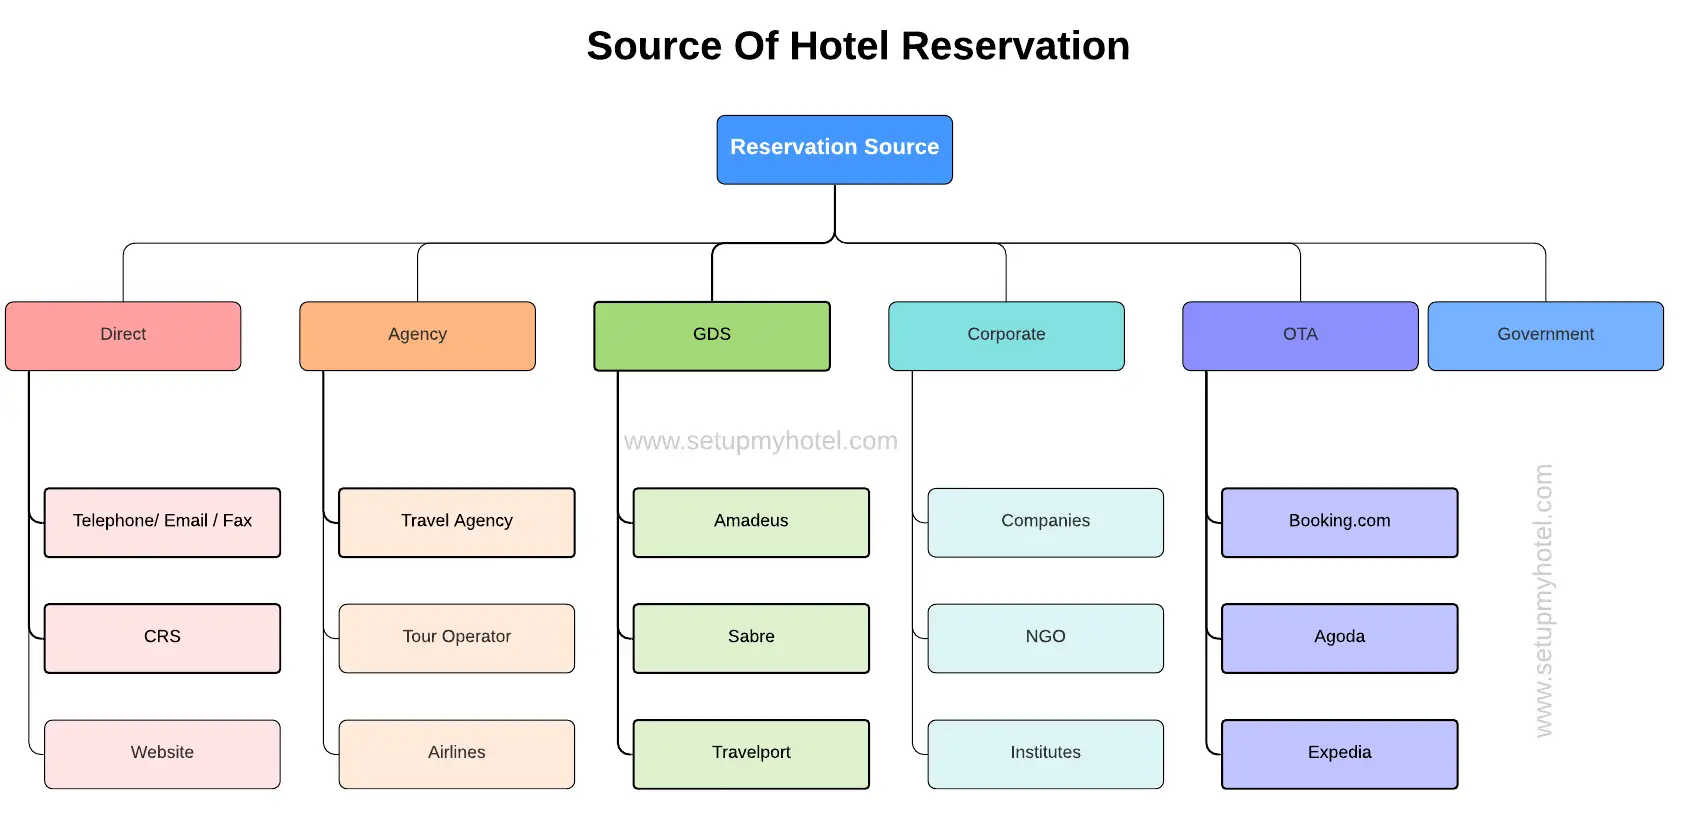 When you book a hotel reservation, it is important to pay attention to the booking source. The booking source is the platform or website that you use to make your reservation. There are many different booking sources available, including the hotel's own website, third-party booking sites, and travel agencies. When booking directly through the hotel's website, you may be able to find exclusive deals or promotions that are not available elsewhere. Additionally, booking directly through the hotel allows you to communicate directly with the hotel staff and ask any questions you may have about your reservation. Third-party booking sites, such as Expedia or Booking.com, can offer a wider range of options and prices for hotels. However, it is important to be aware of any additional fees or restrictions that may come with booking through a third-party site. It is also important to carefully read the reviews of the hotel and the booking site before making a reservation. Travel agencies can also be a helpful resource for booking hotel reservations, particularly if you are planning a complex itinerary or multiple bookings. However, they may charge a fee for their services. Overall, it is important to do your research and carefully consider the booking source when making a hotel reservation to ensure that you are getting the best possible deal and experience.